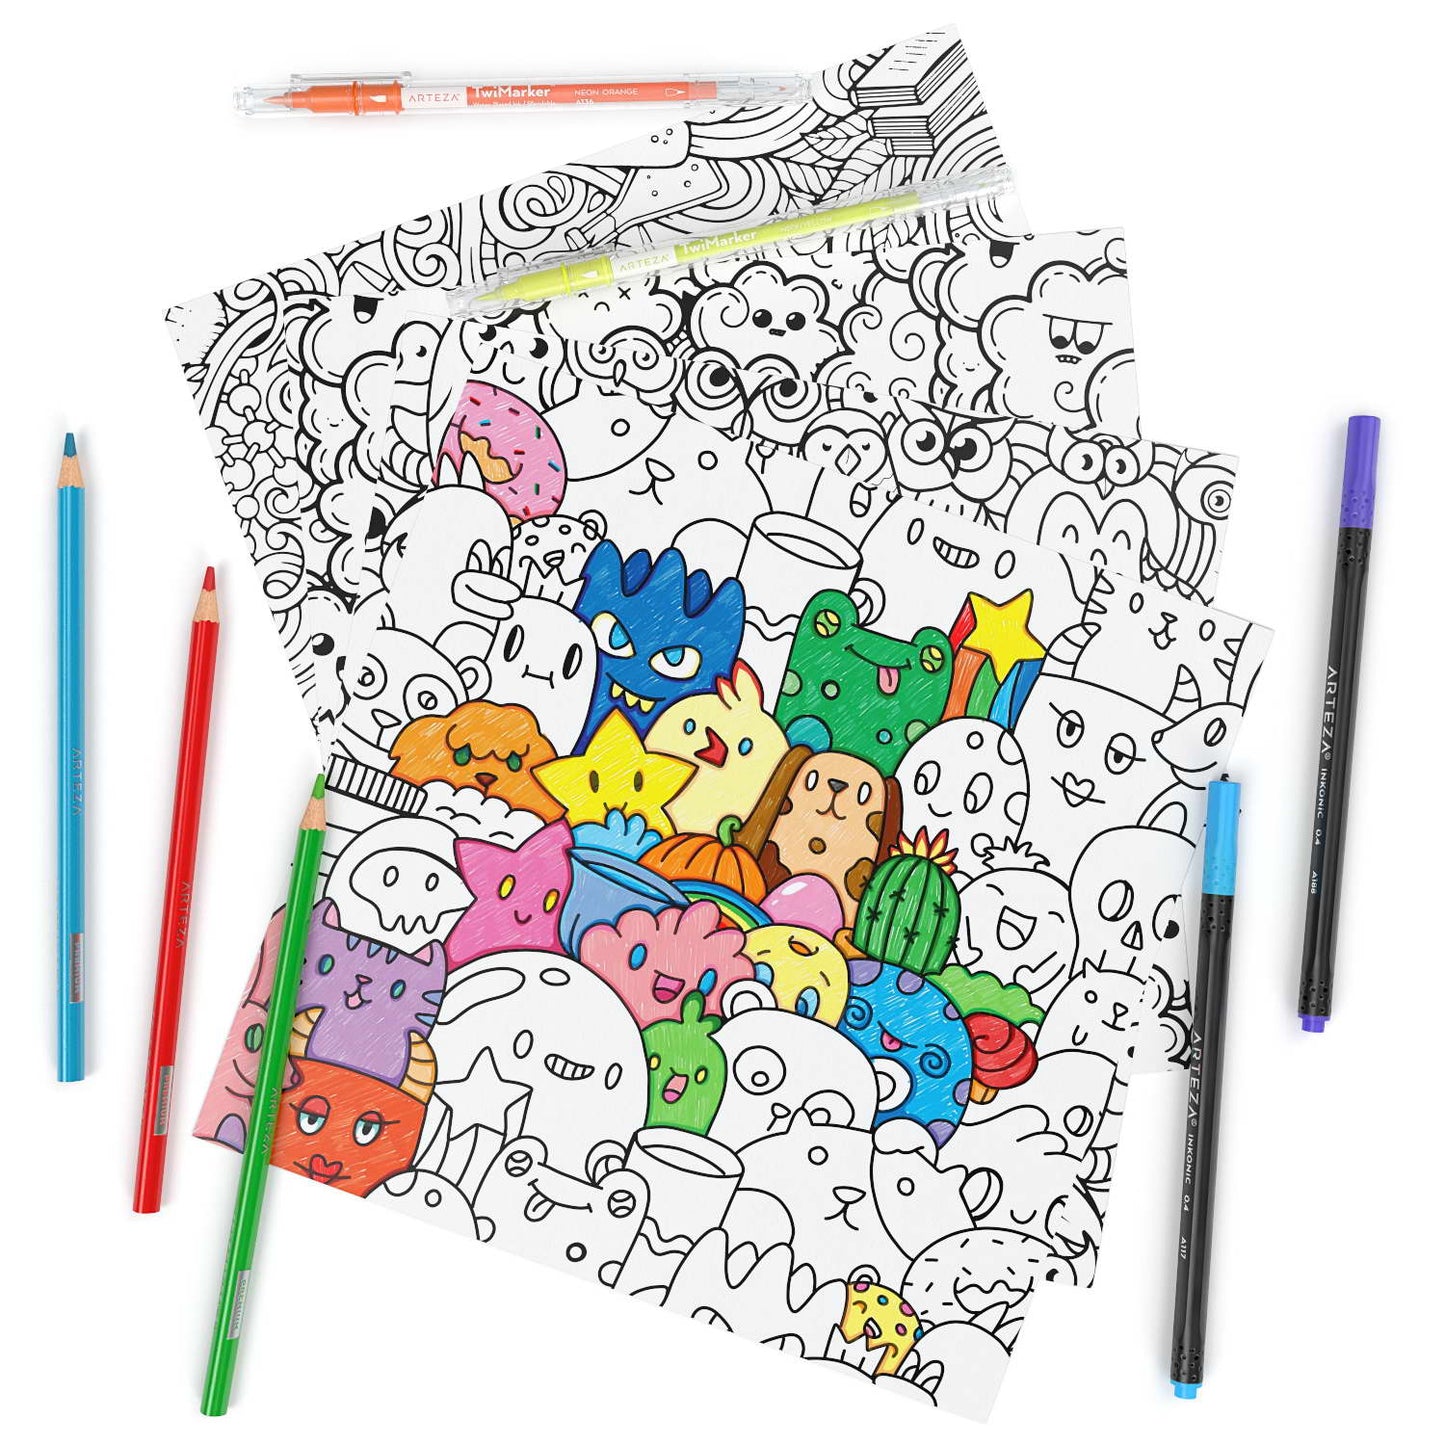 Coloring Book 9" x 9" Doodle Illustrations, 50 Sheets